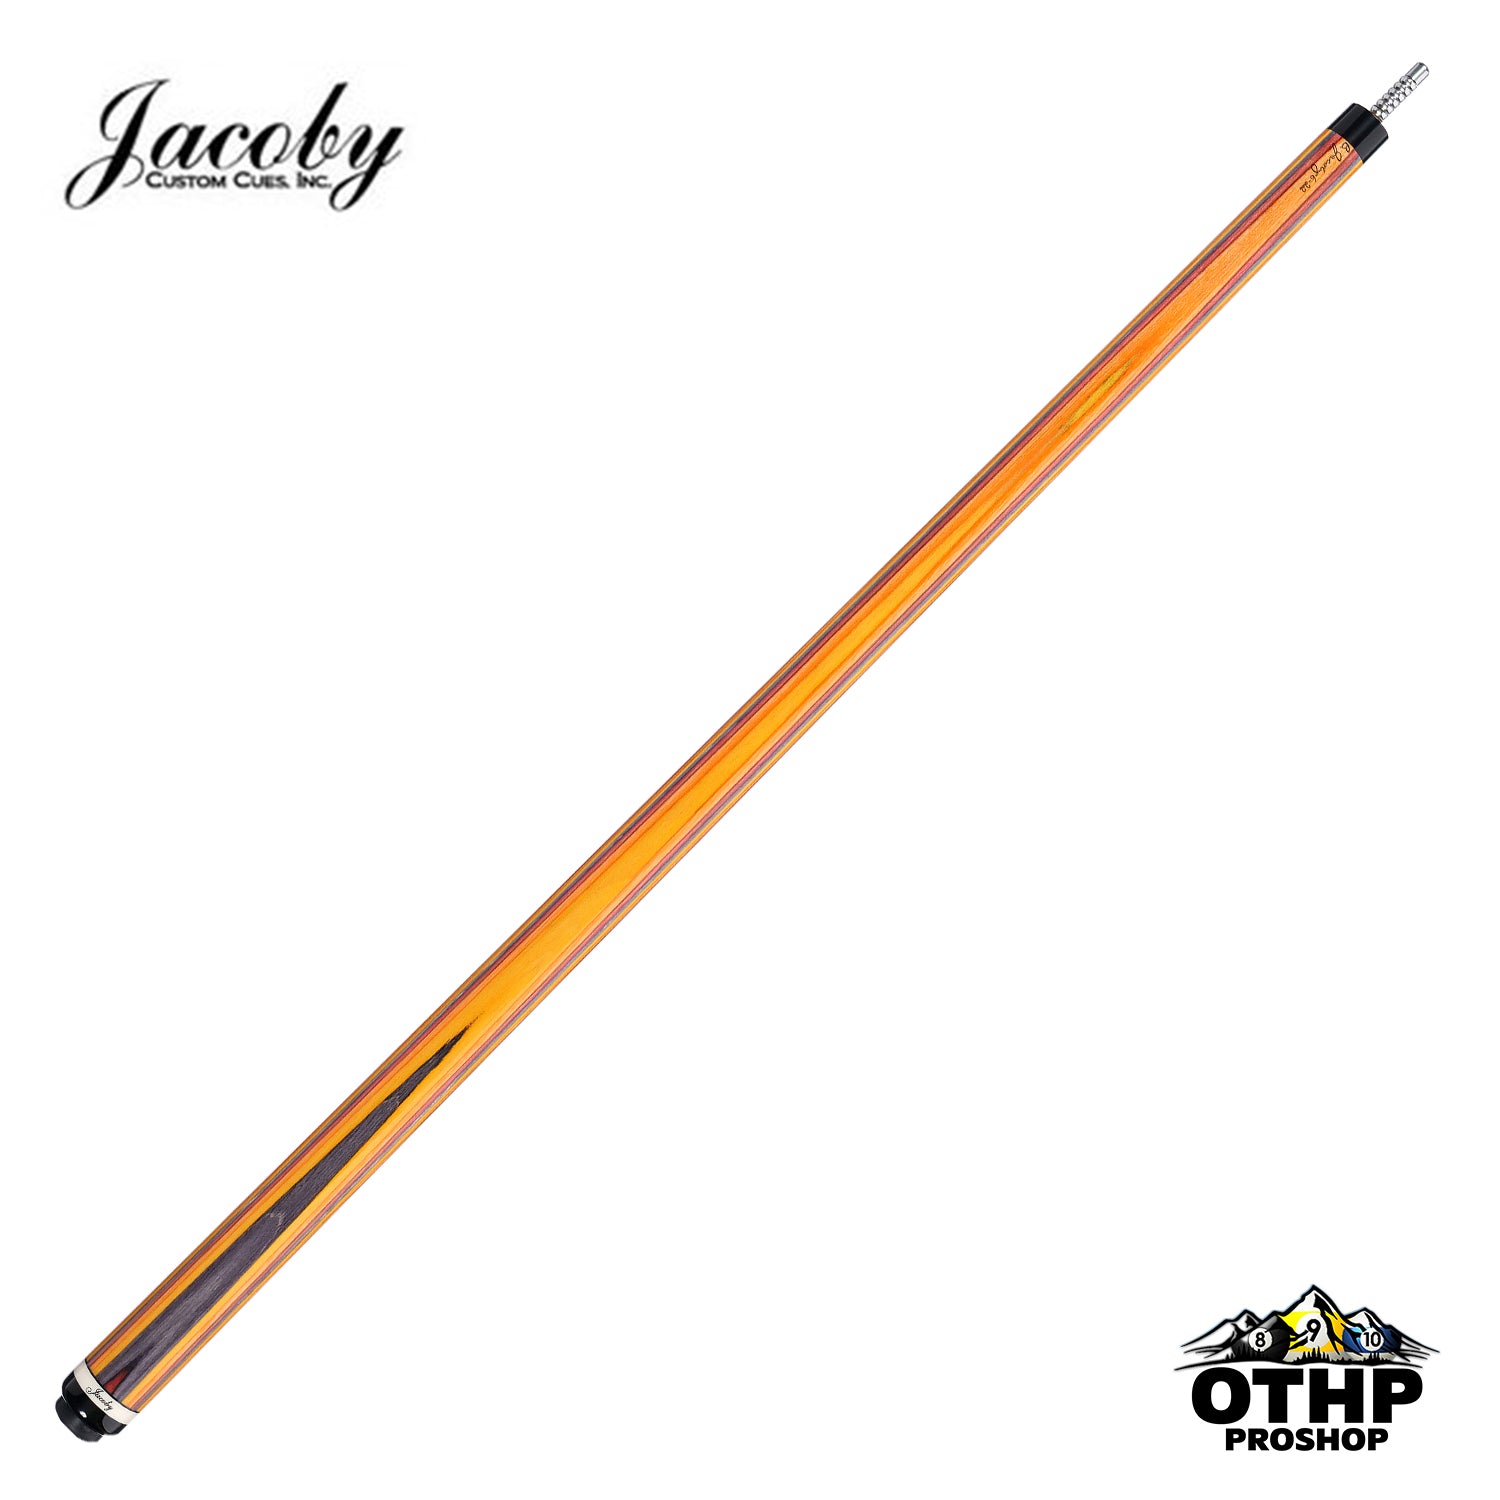 Jacoby Element Series Cues